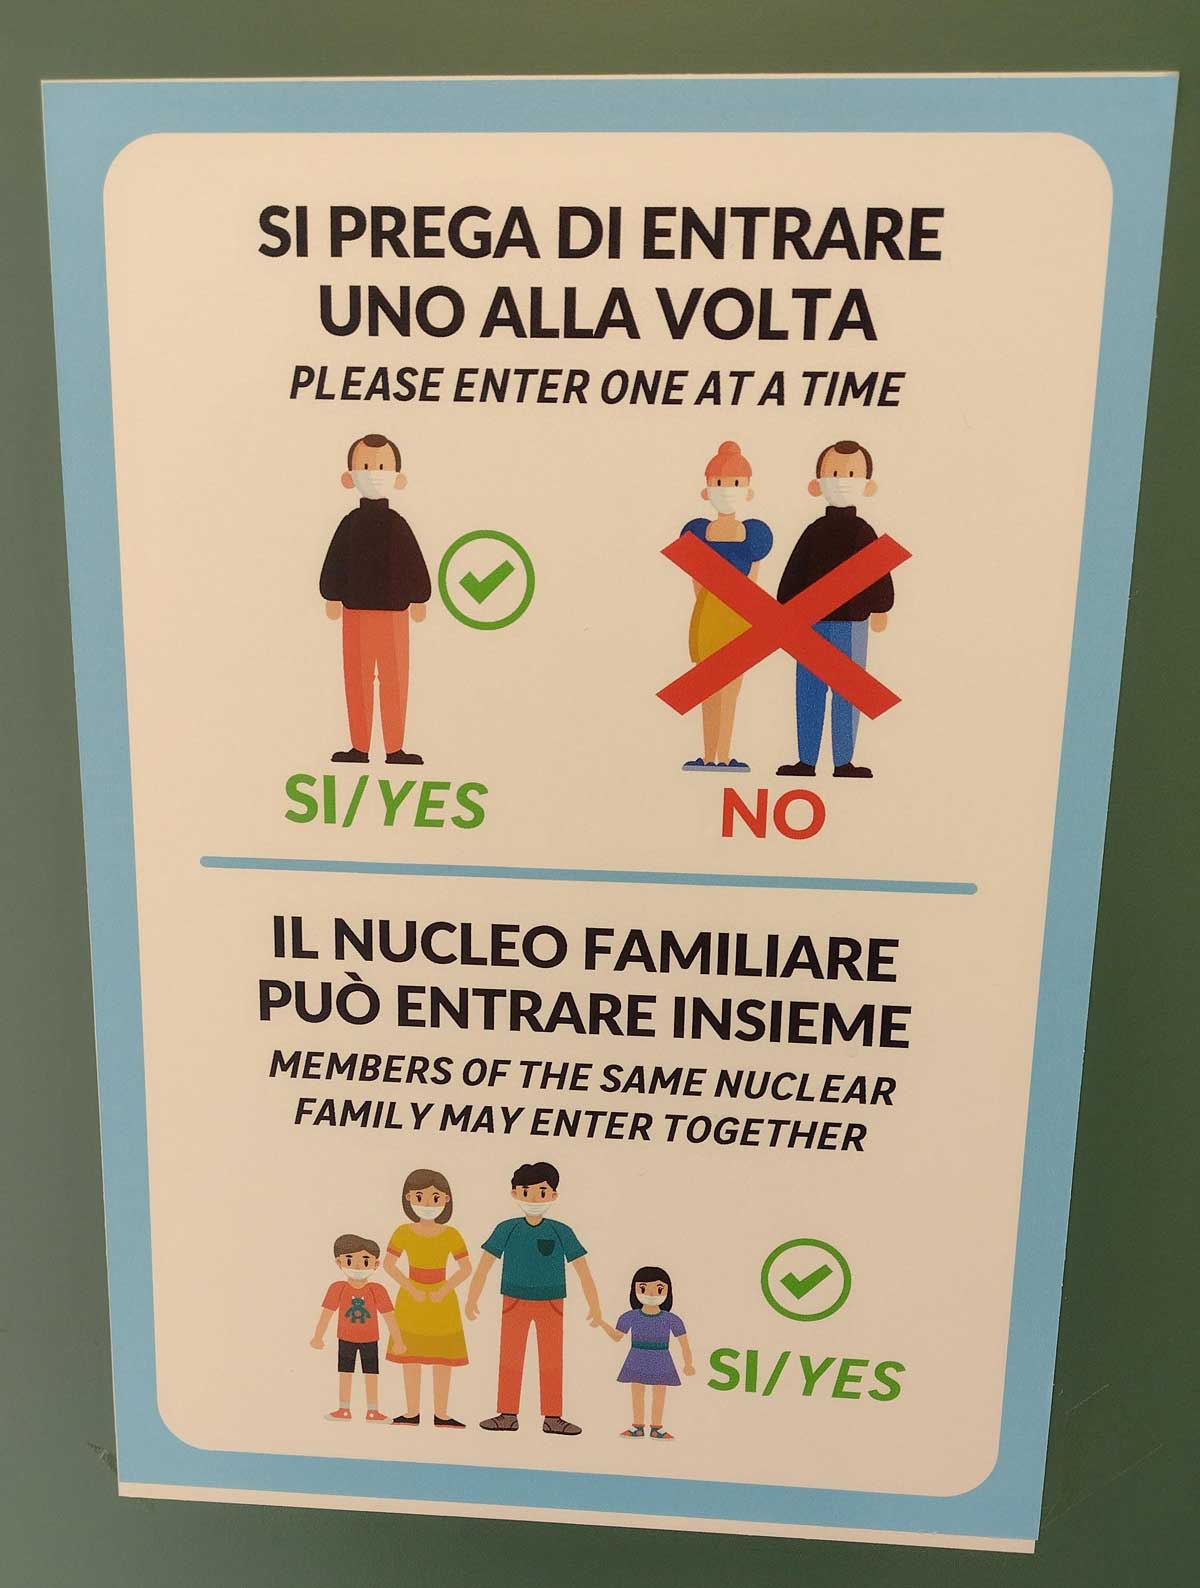 In a shopping mall in Italy